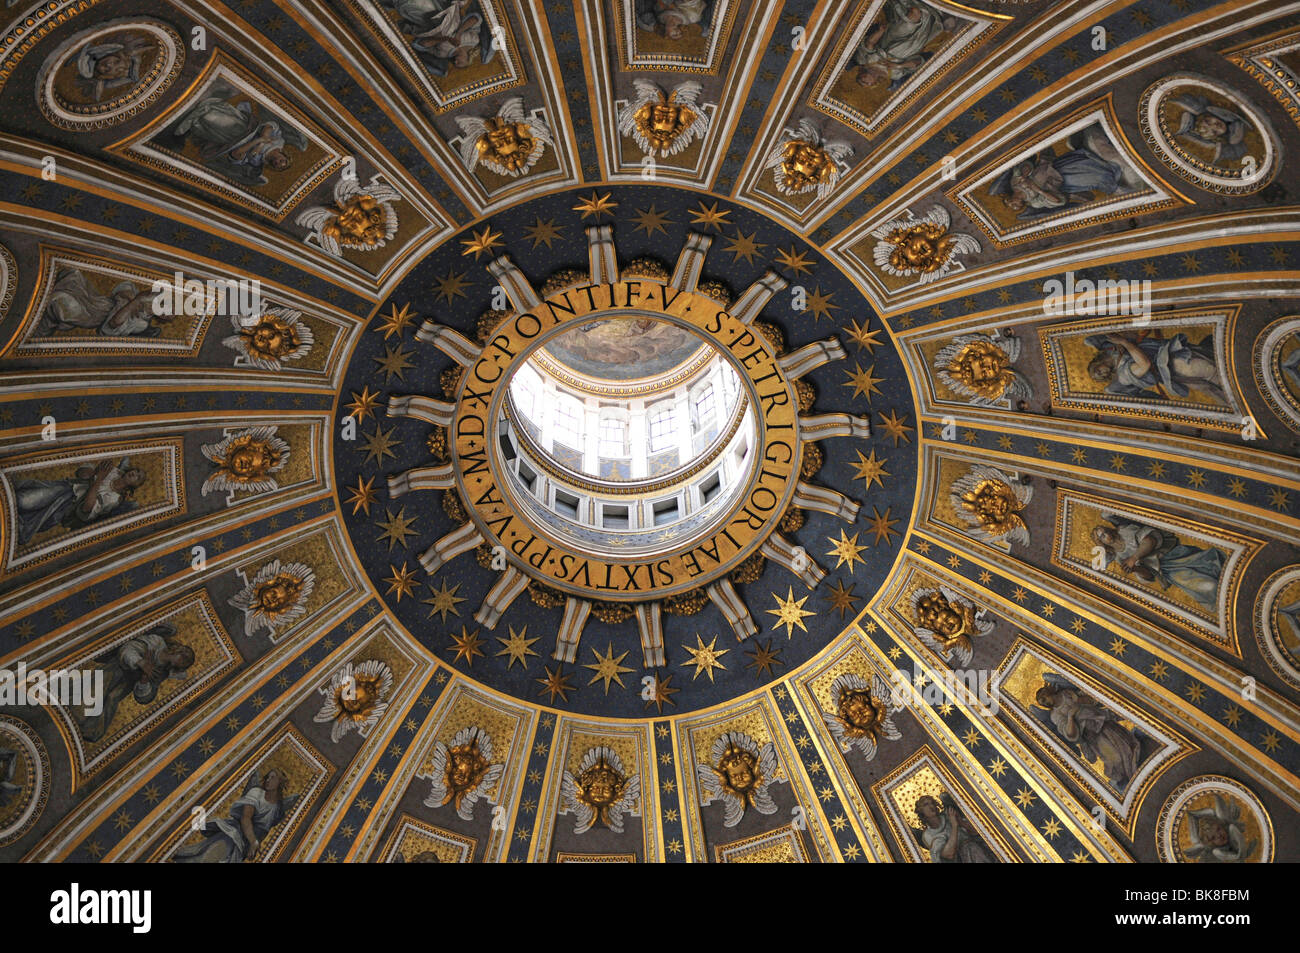 Michelangelo's dome, St. Peter's Basilica, historic city centre, Vatican City, Italy, Europe Stock Photo